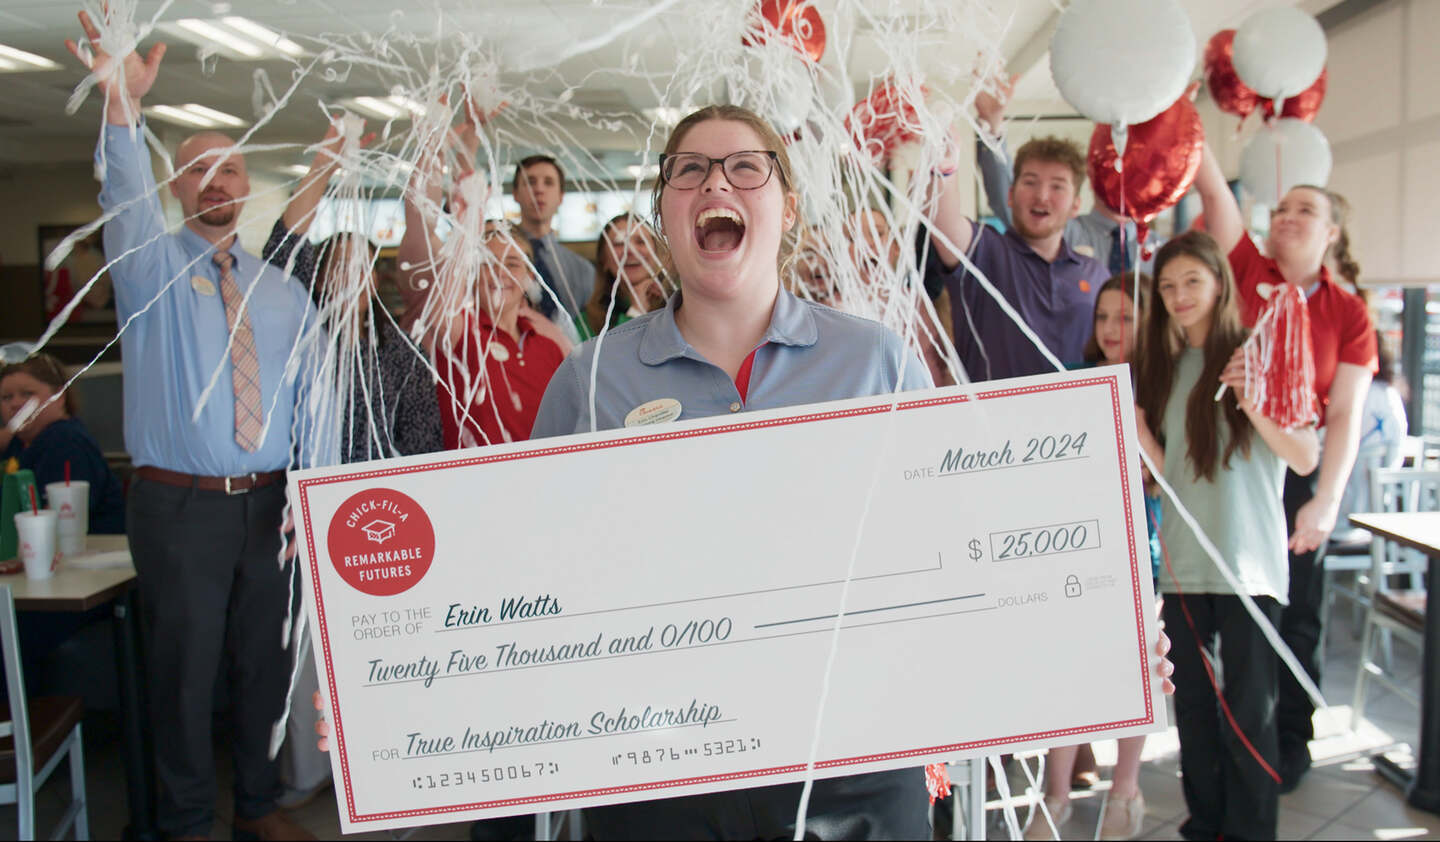 Chick-fil-A Team Member Erin Watts celebrating being awarded a 2024 True Inspiration Scholarship.